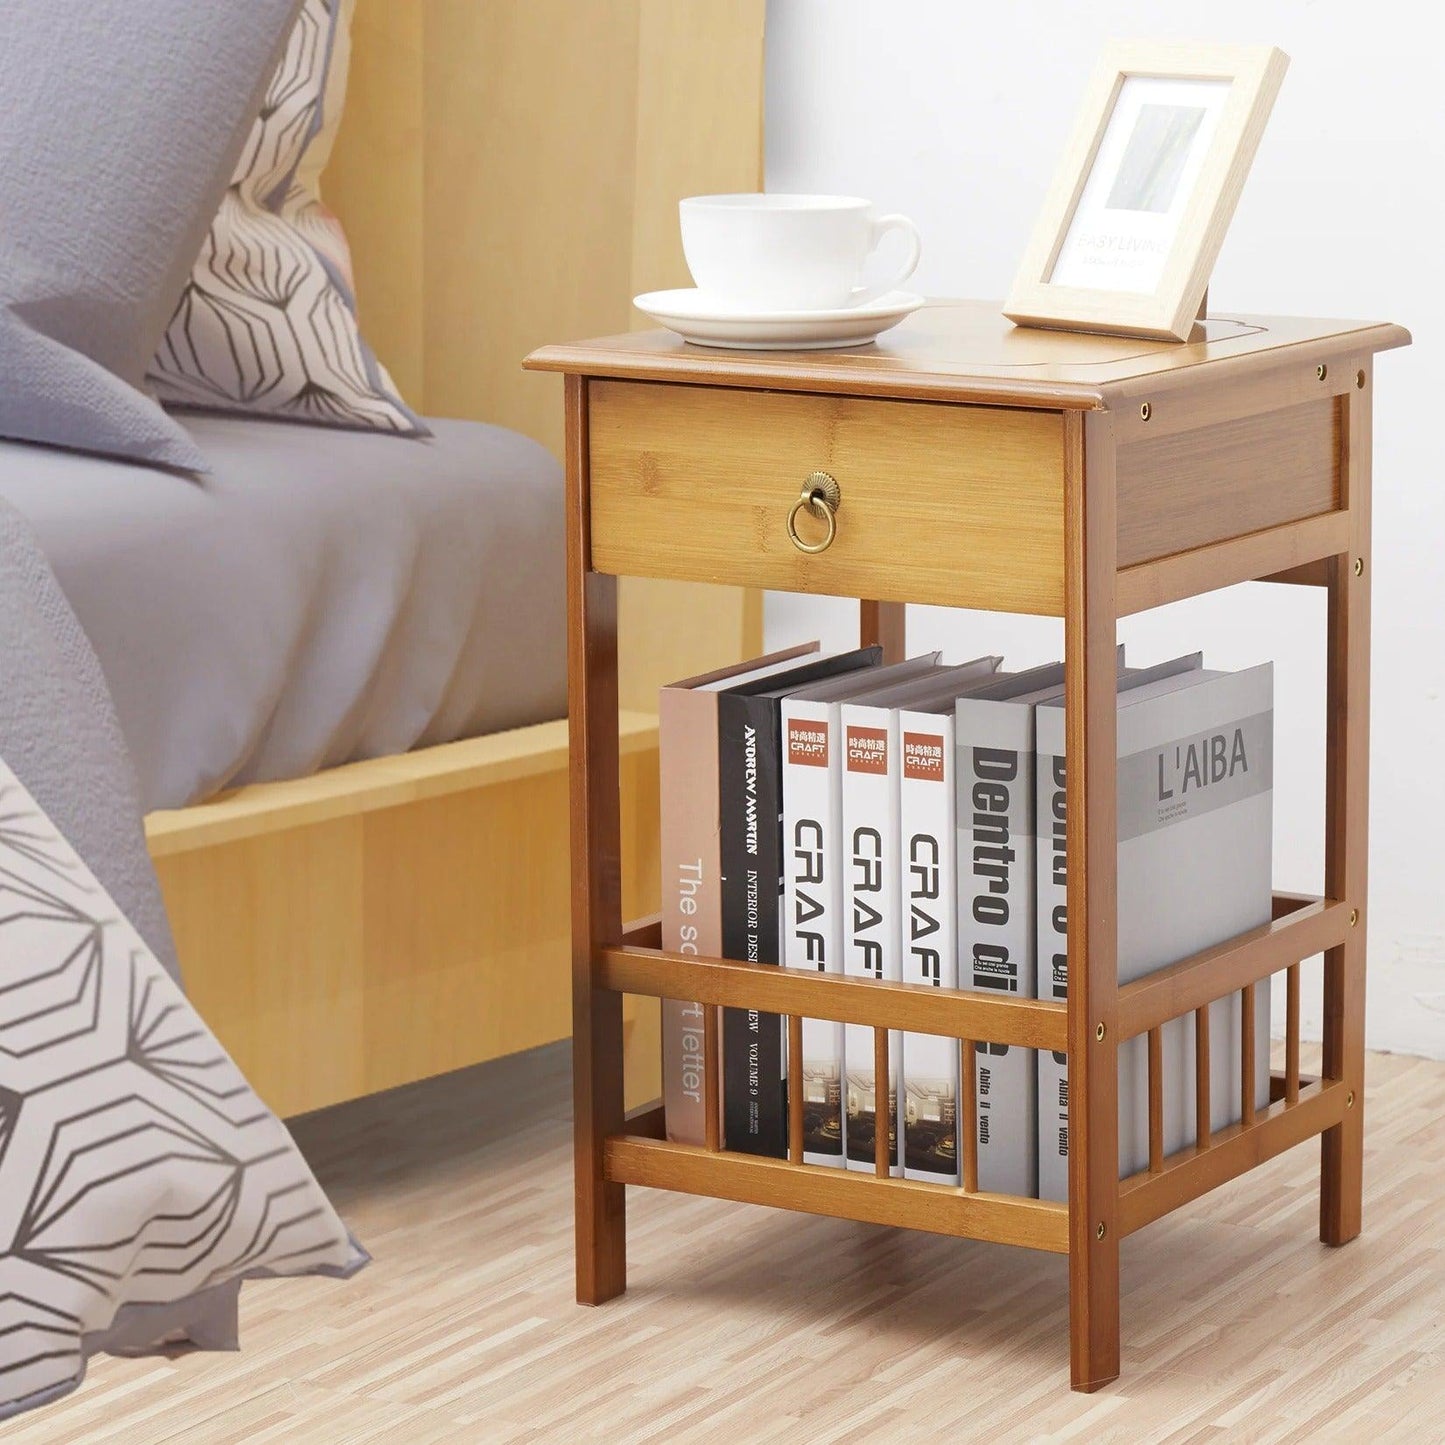 Wood Bamboo Side Table with Drawer │ Modern Storage Nightstand Furniture for Living room Bedroom - Besontique